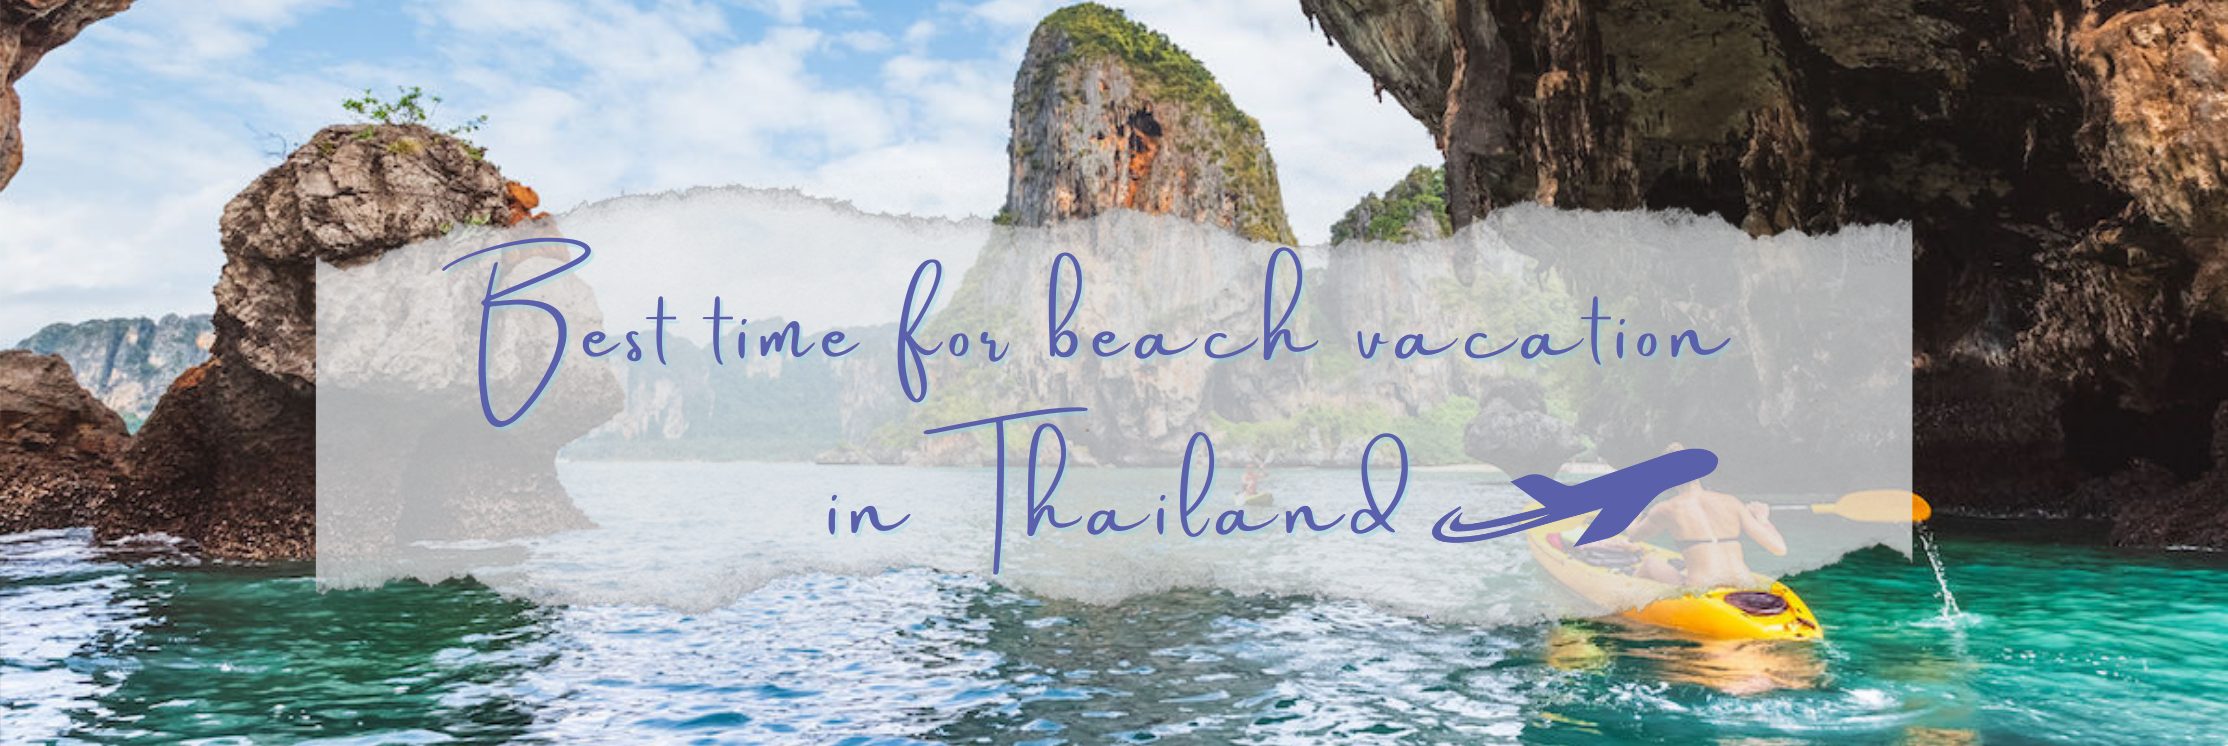 Best time to visit beaches in Thailand